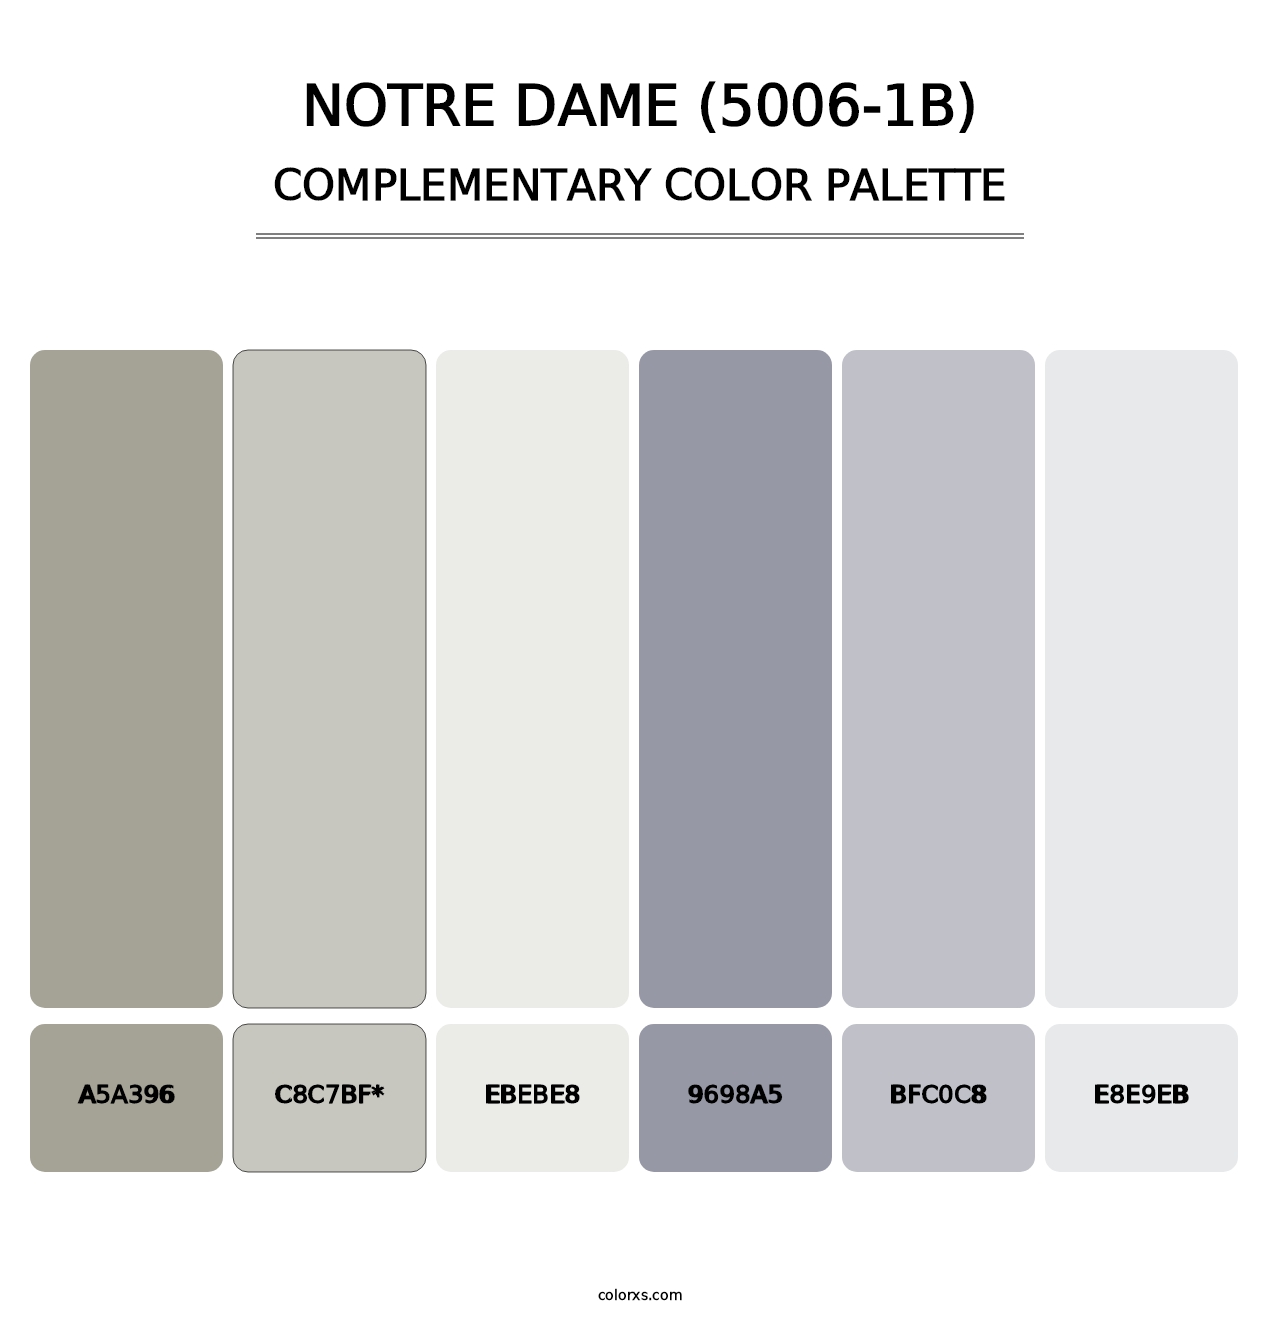 Notre Dame (5006-1B) - Complementary Color Palette